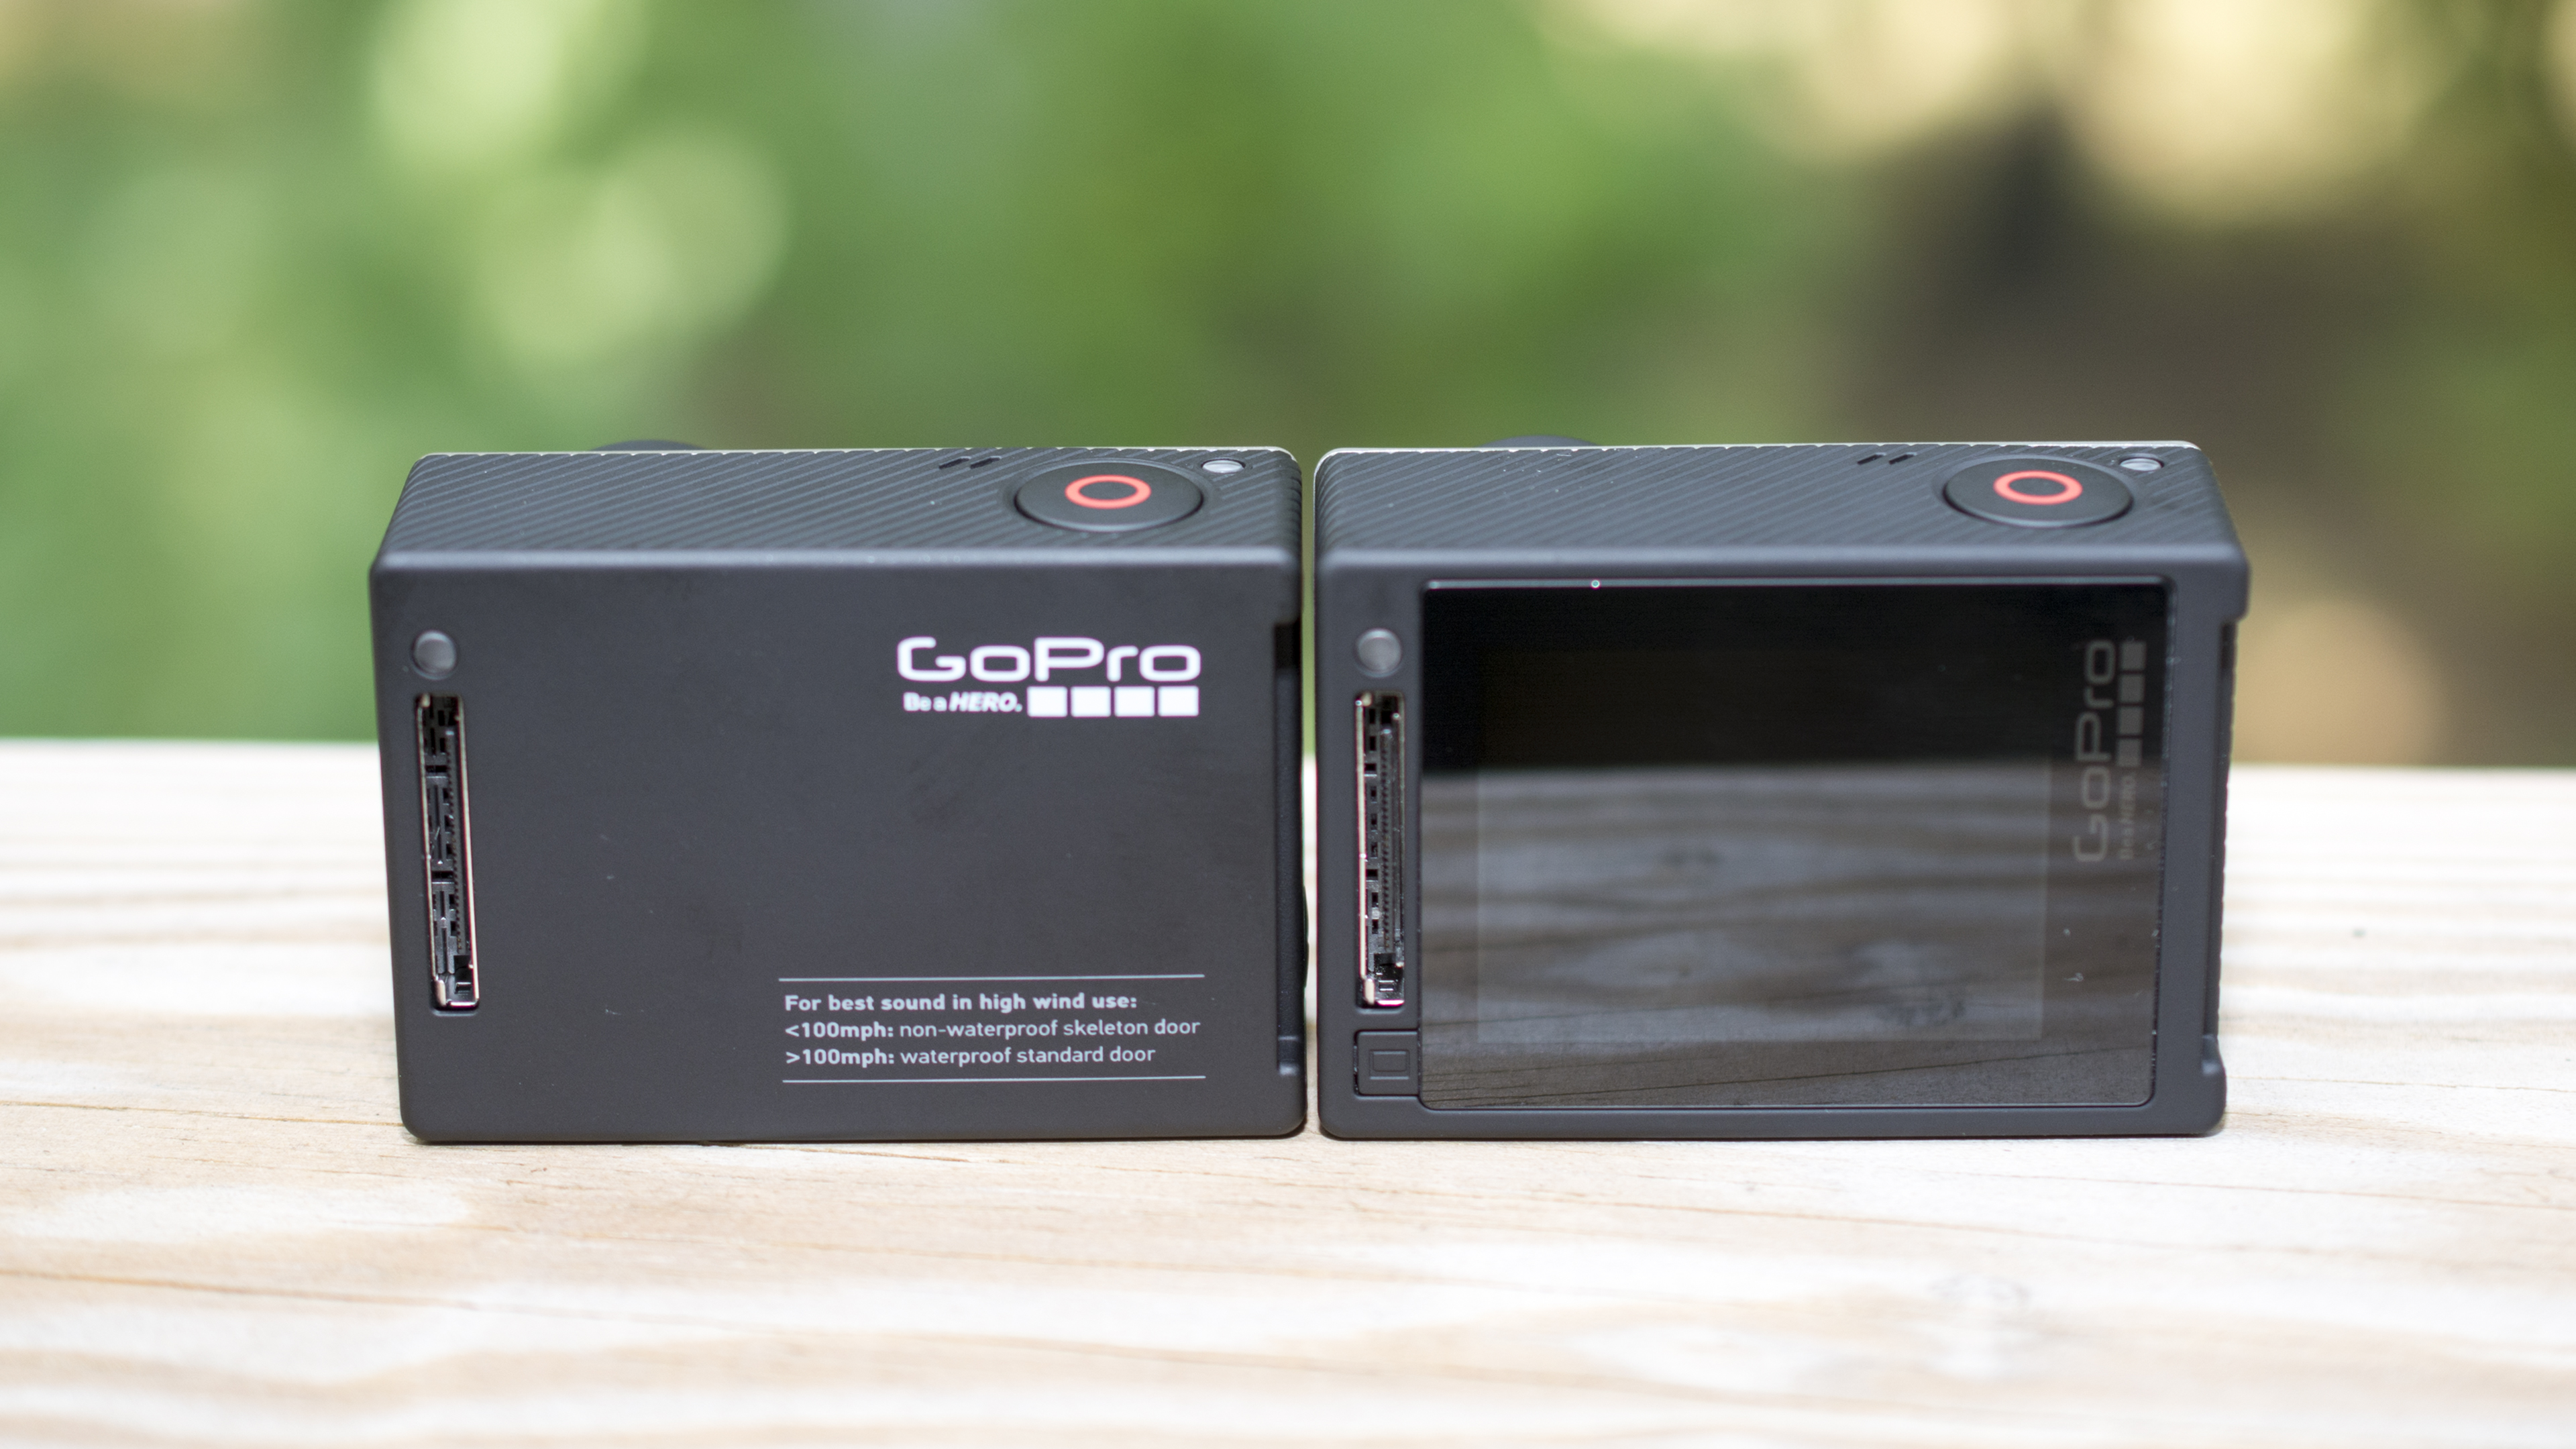 Gopro Hero4 Black Review Gopro Hero4 Black Delivers Smooth 4k Video Better Low Light Performance Cnet